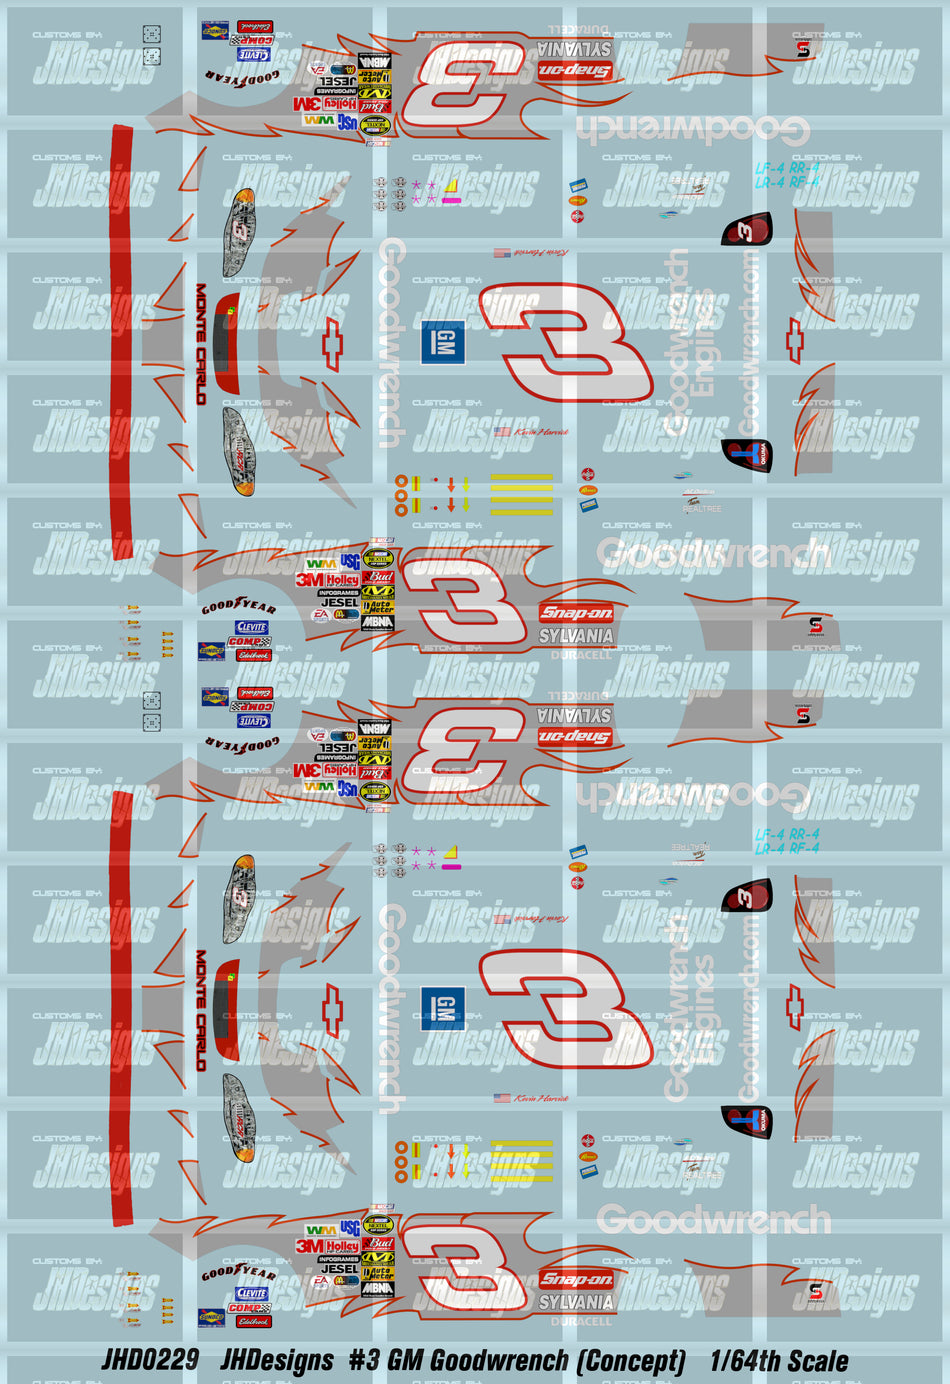 JH Designs Kevin Harvick 2004 CUP #3 GM Goodwrench (Bring Back the 3 Concept) 1:64 Racecar Decal Set